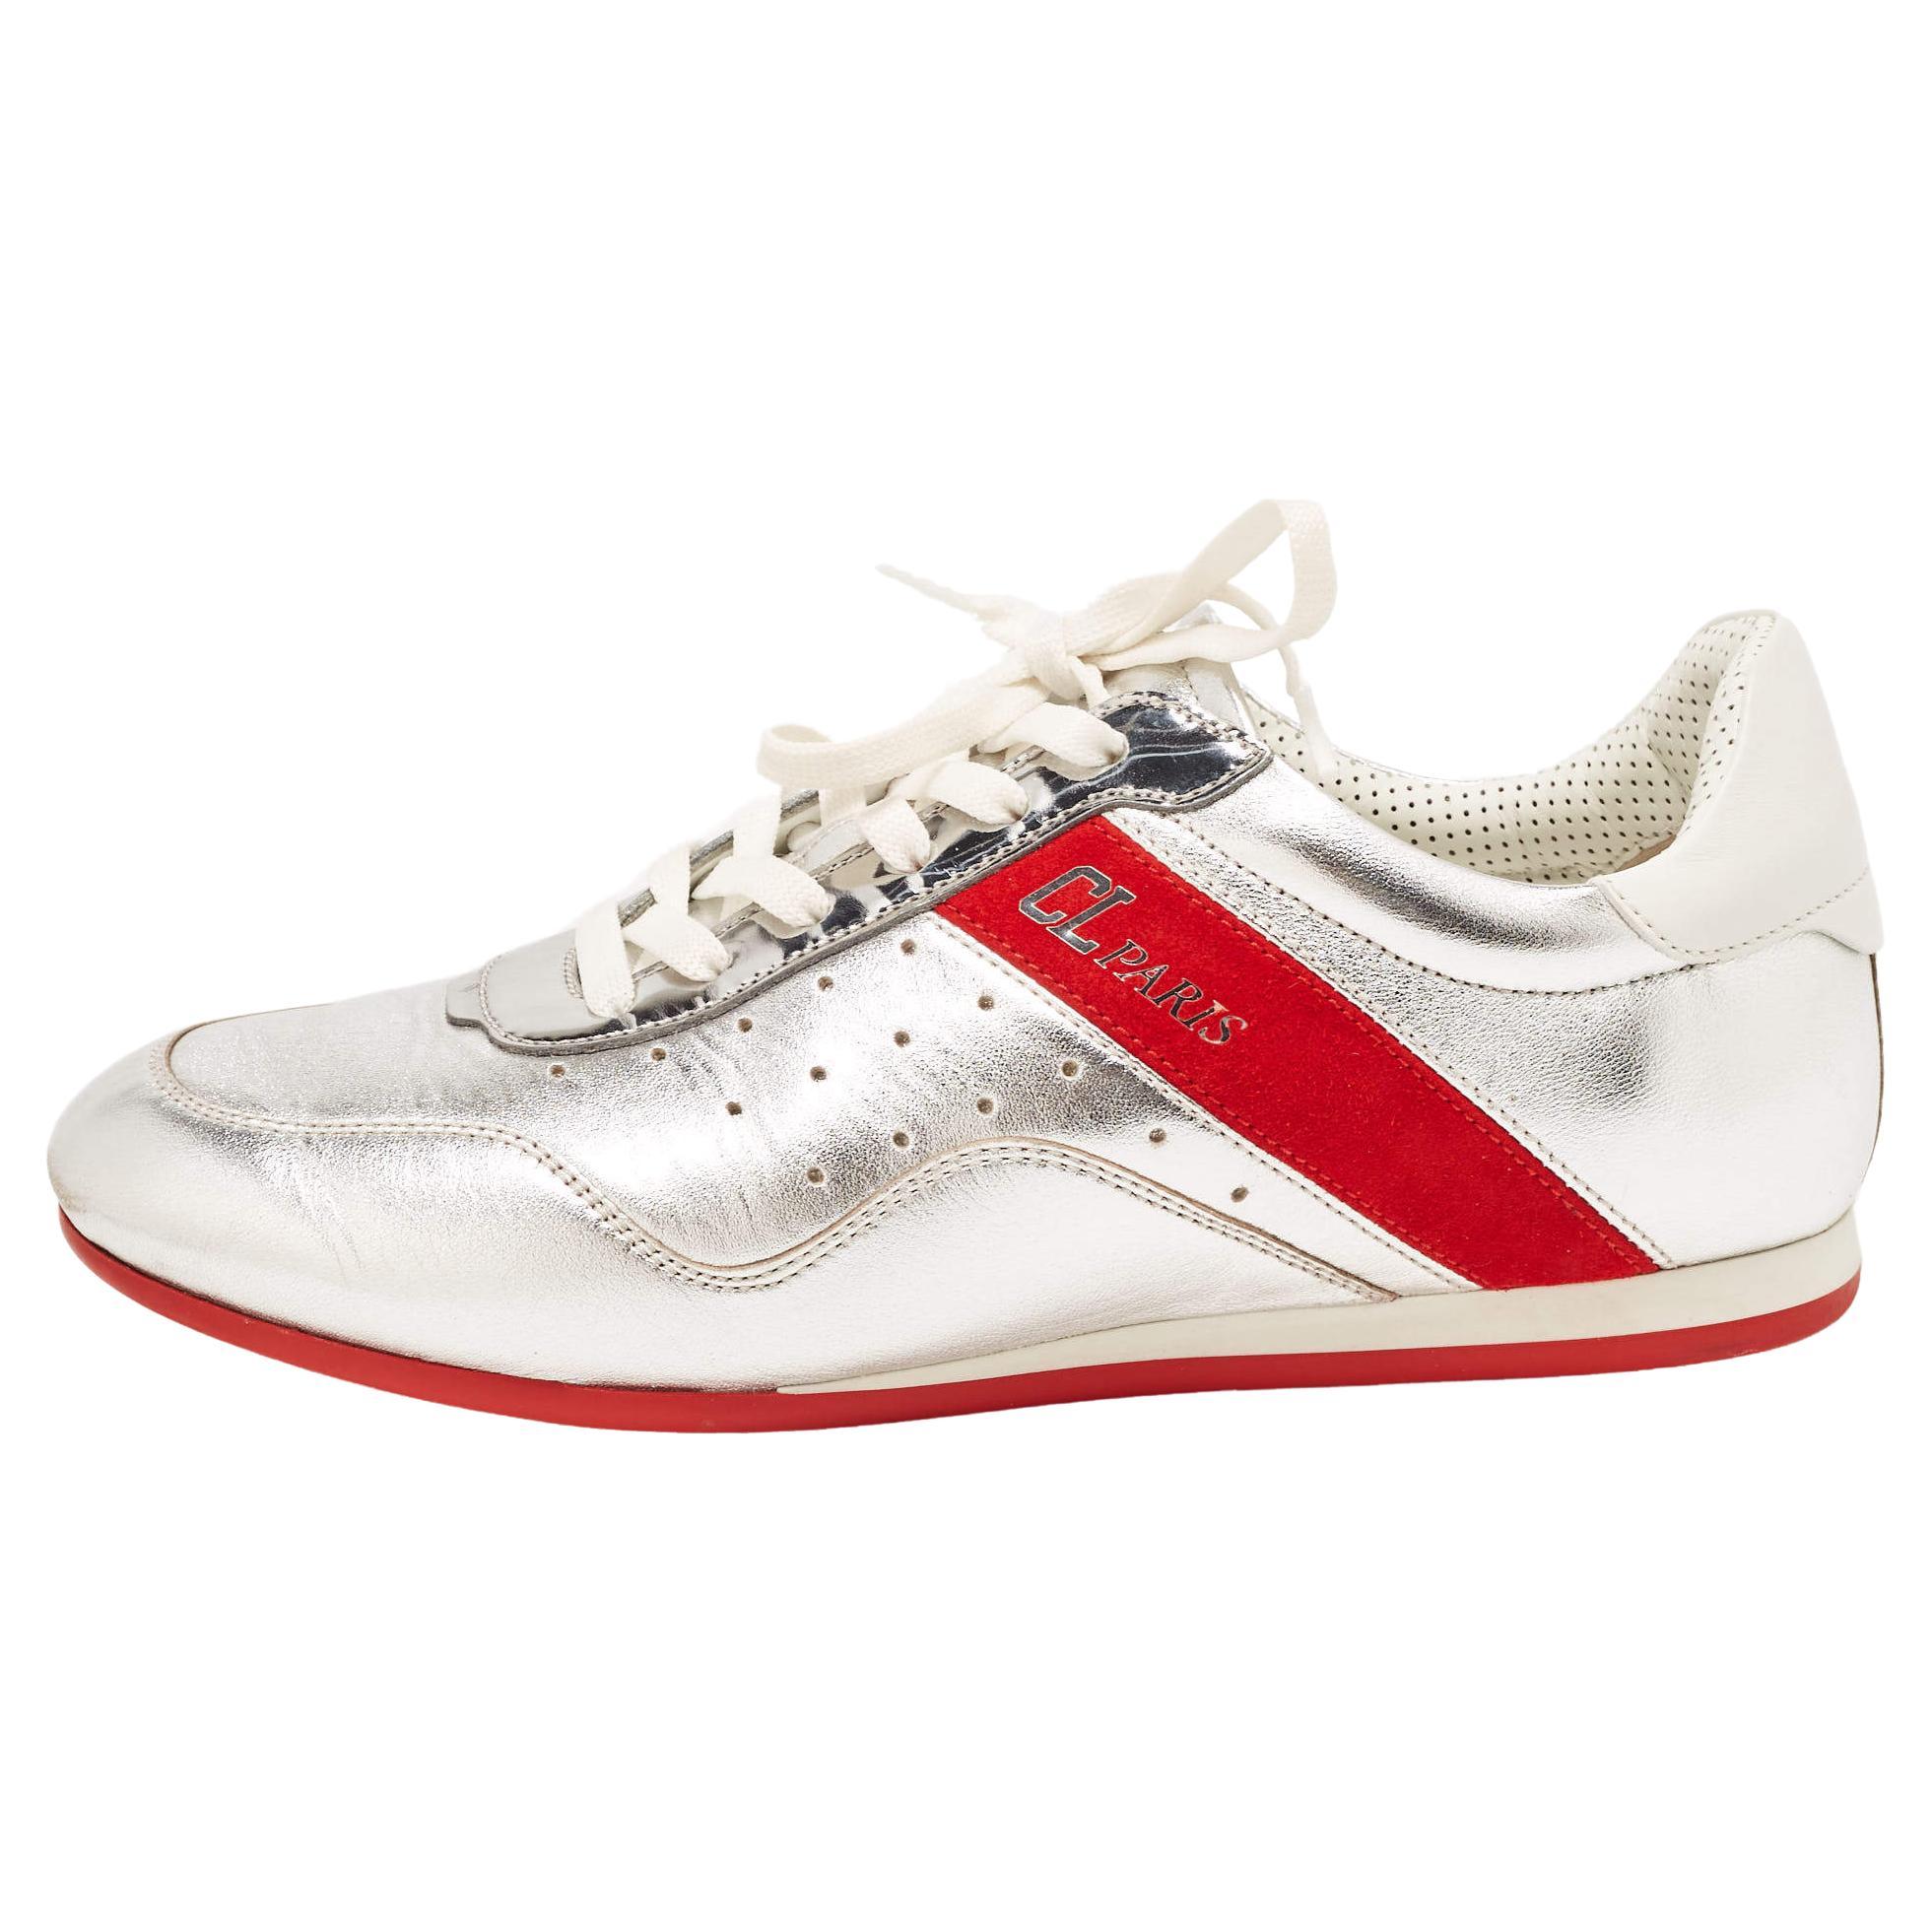 Christian Louboutin Silver/Red Leather and Suede My K Low Sneakers Size 36.5 For Sale